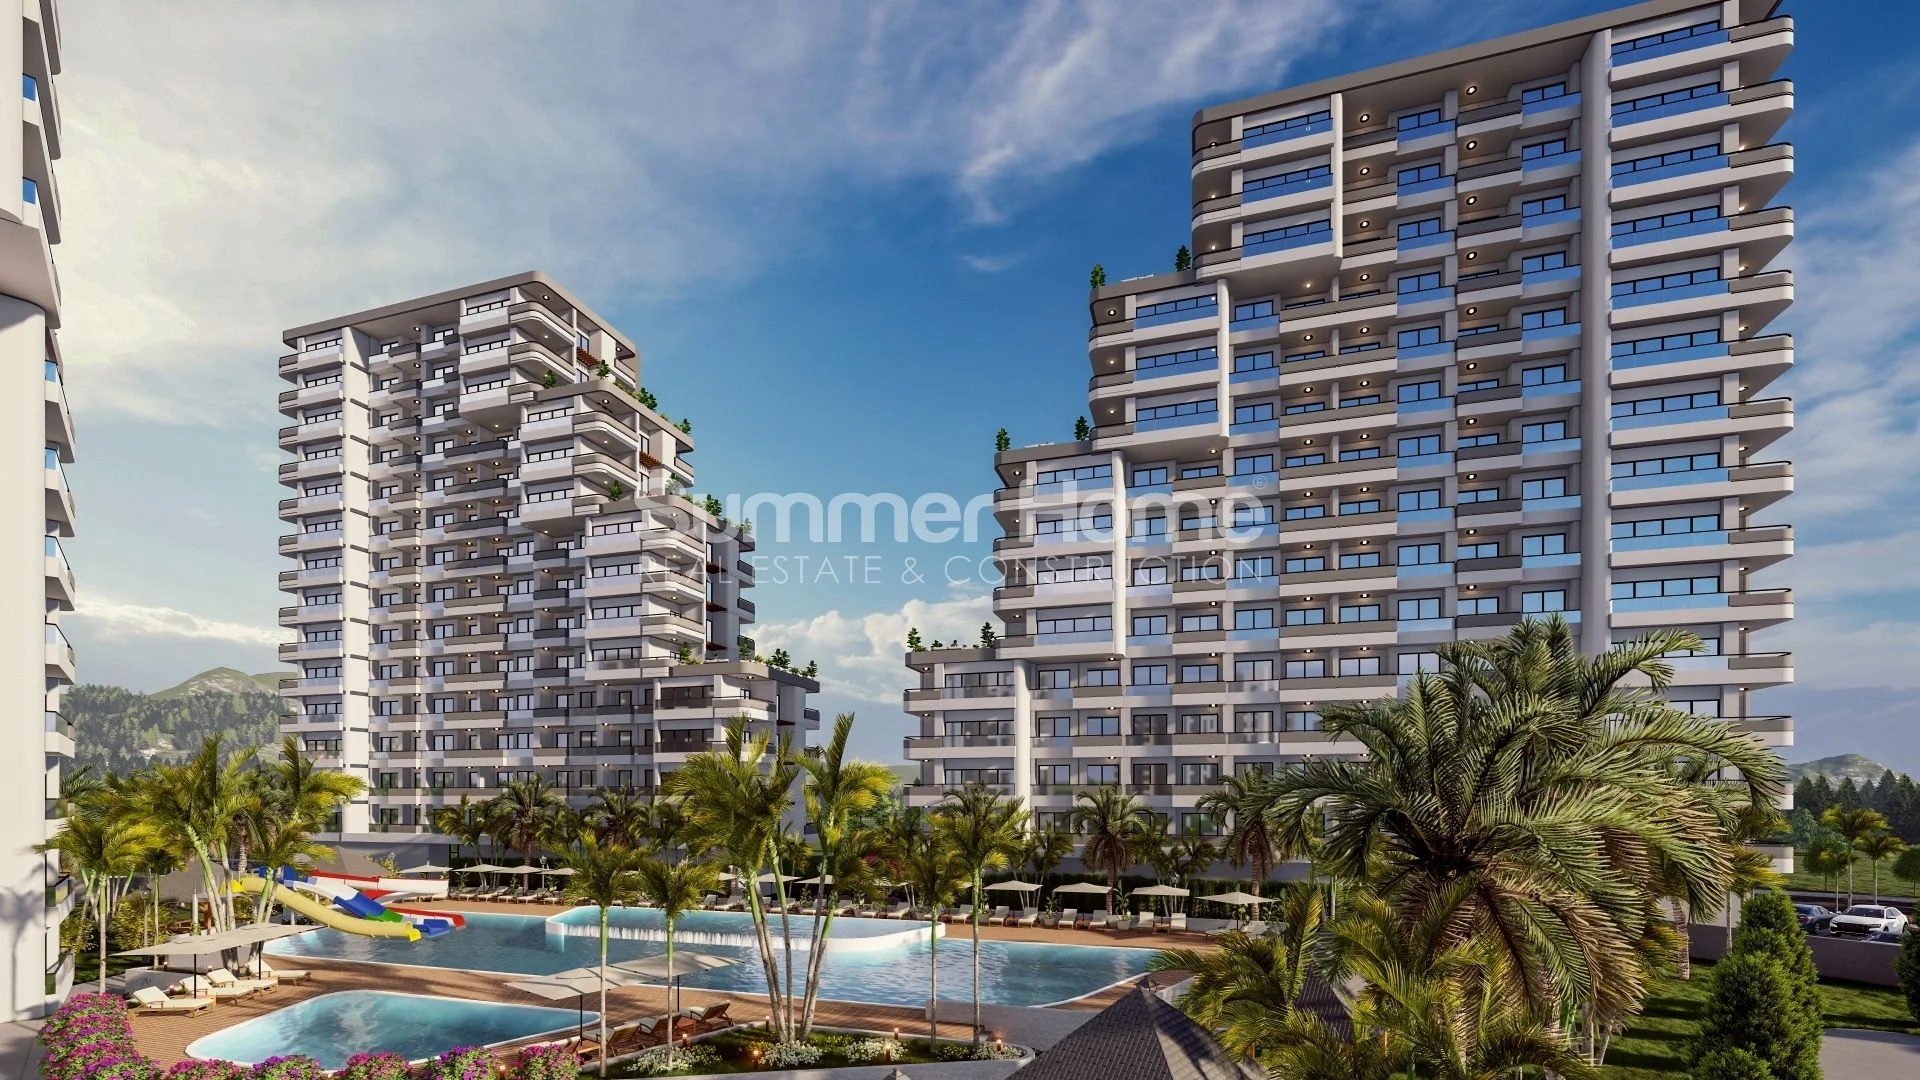 Affordable residential housing located in Mezitli Mersin Plan - 55